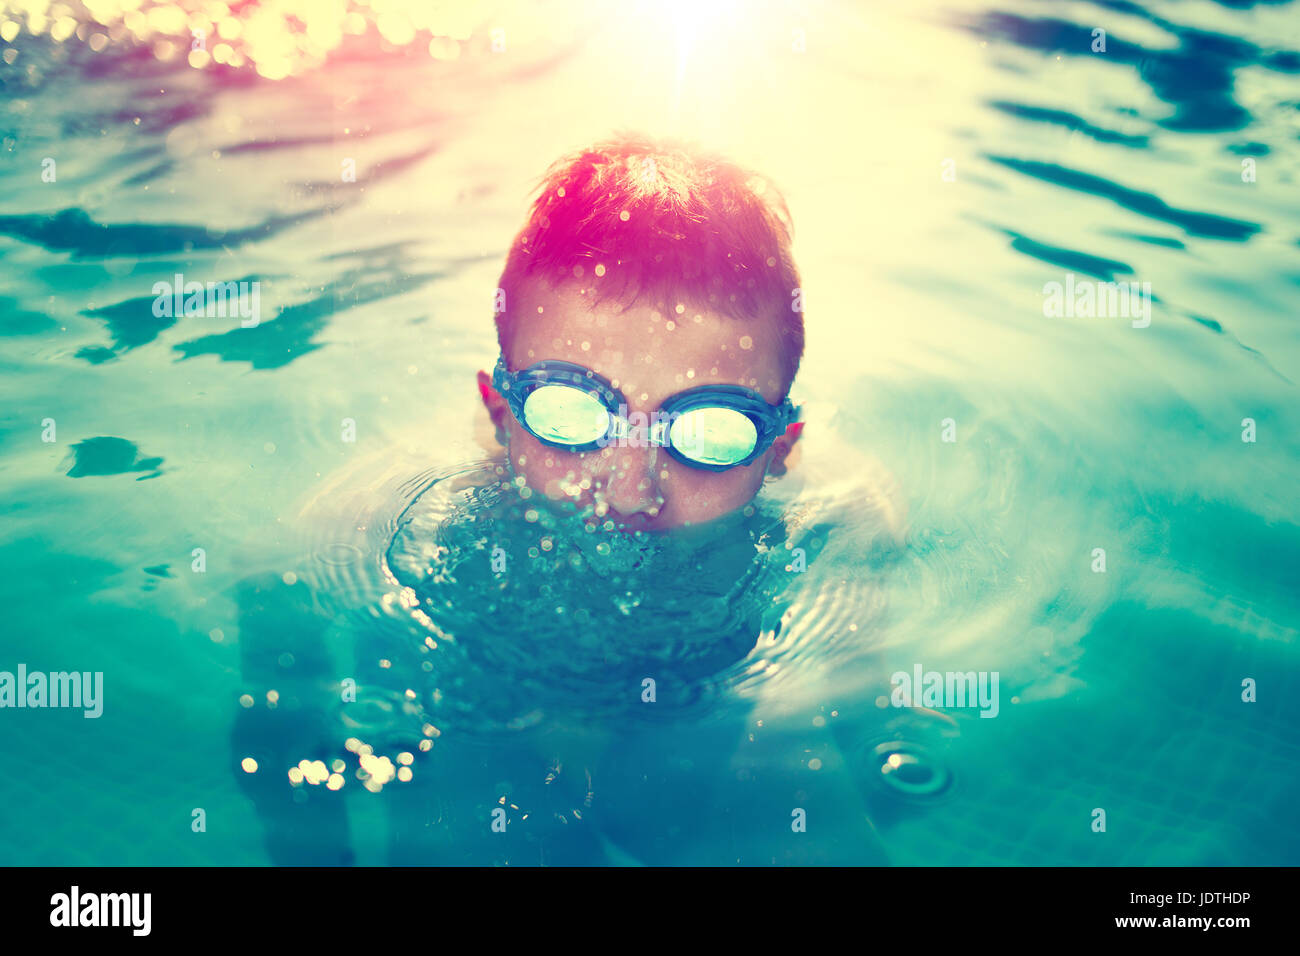 Kid go under water in swimming pool at outdoor sunset, vintage style Stock Photo